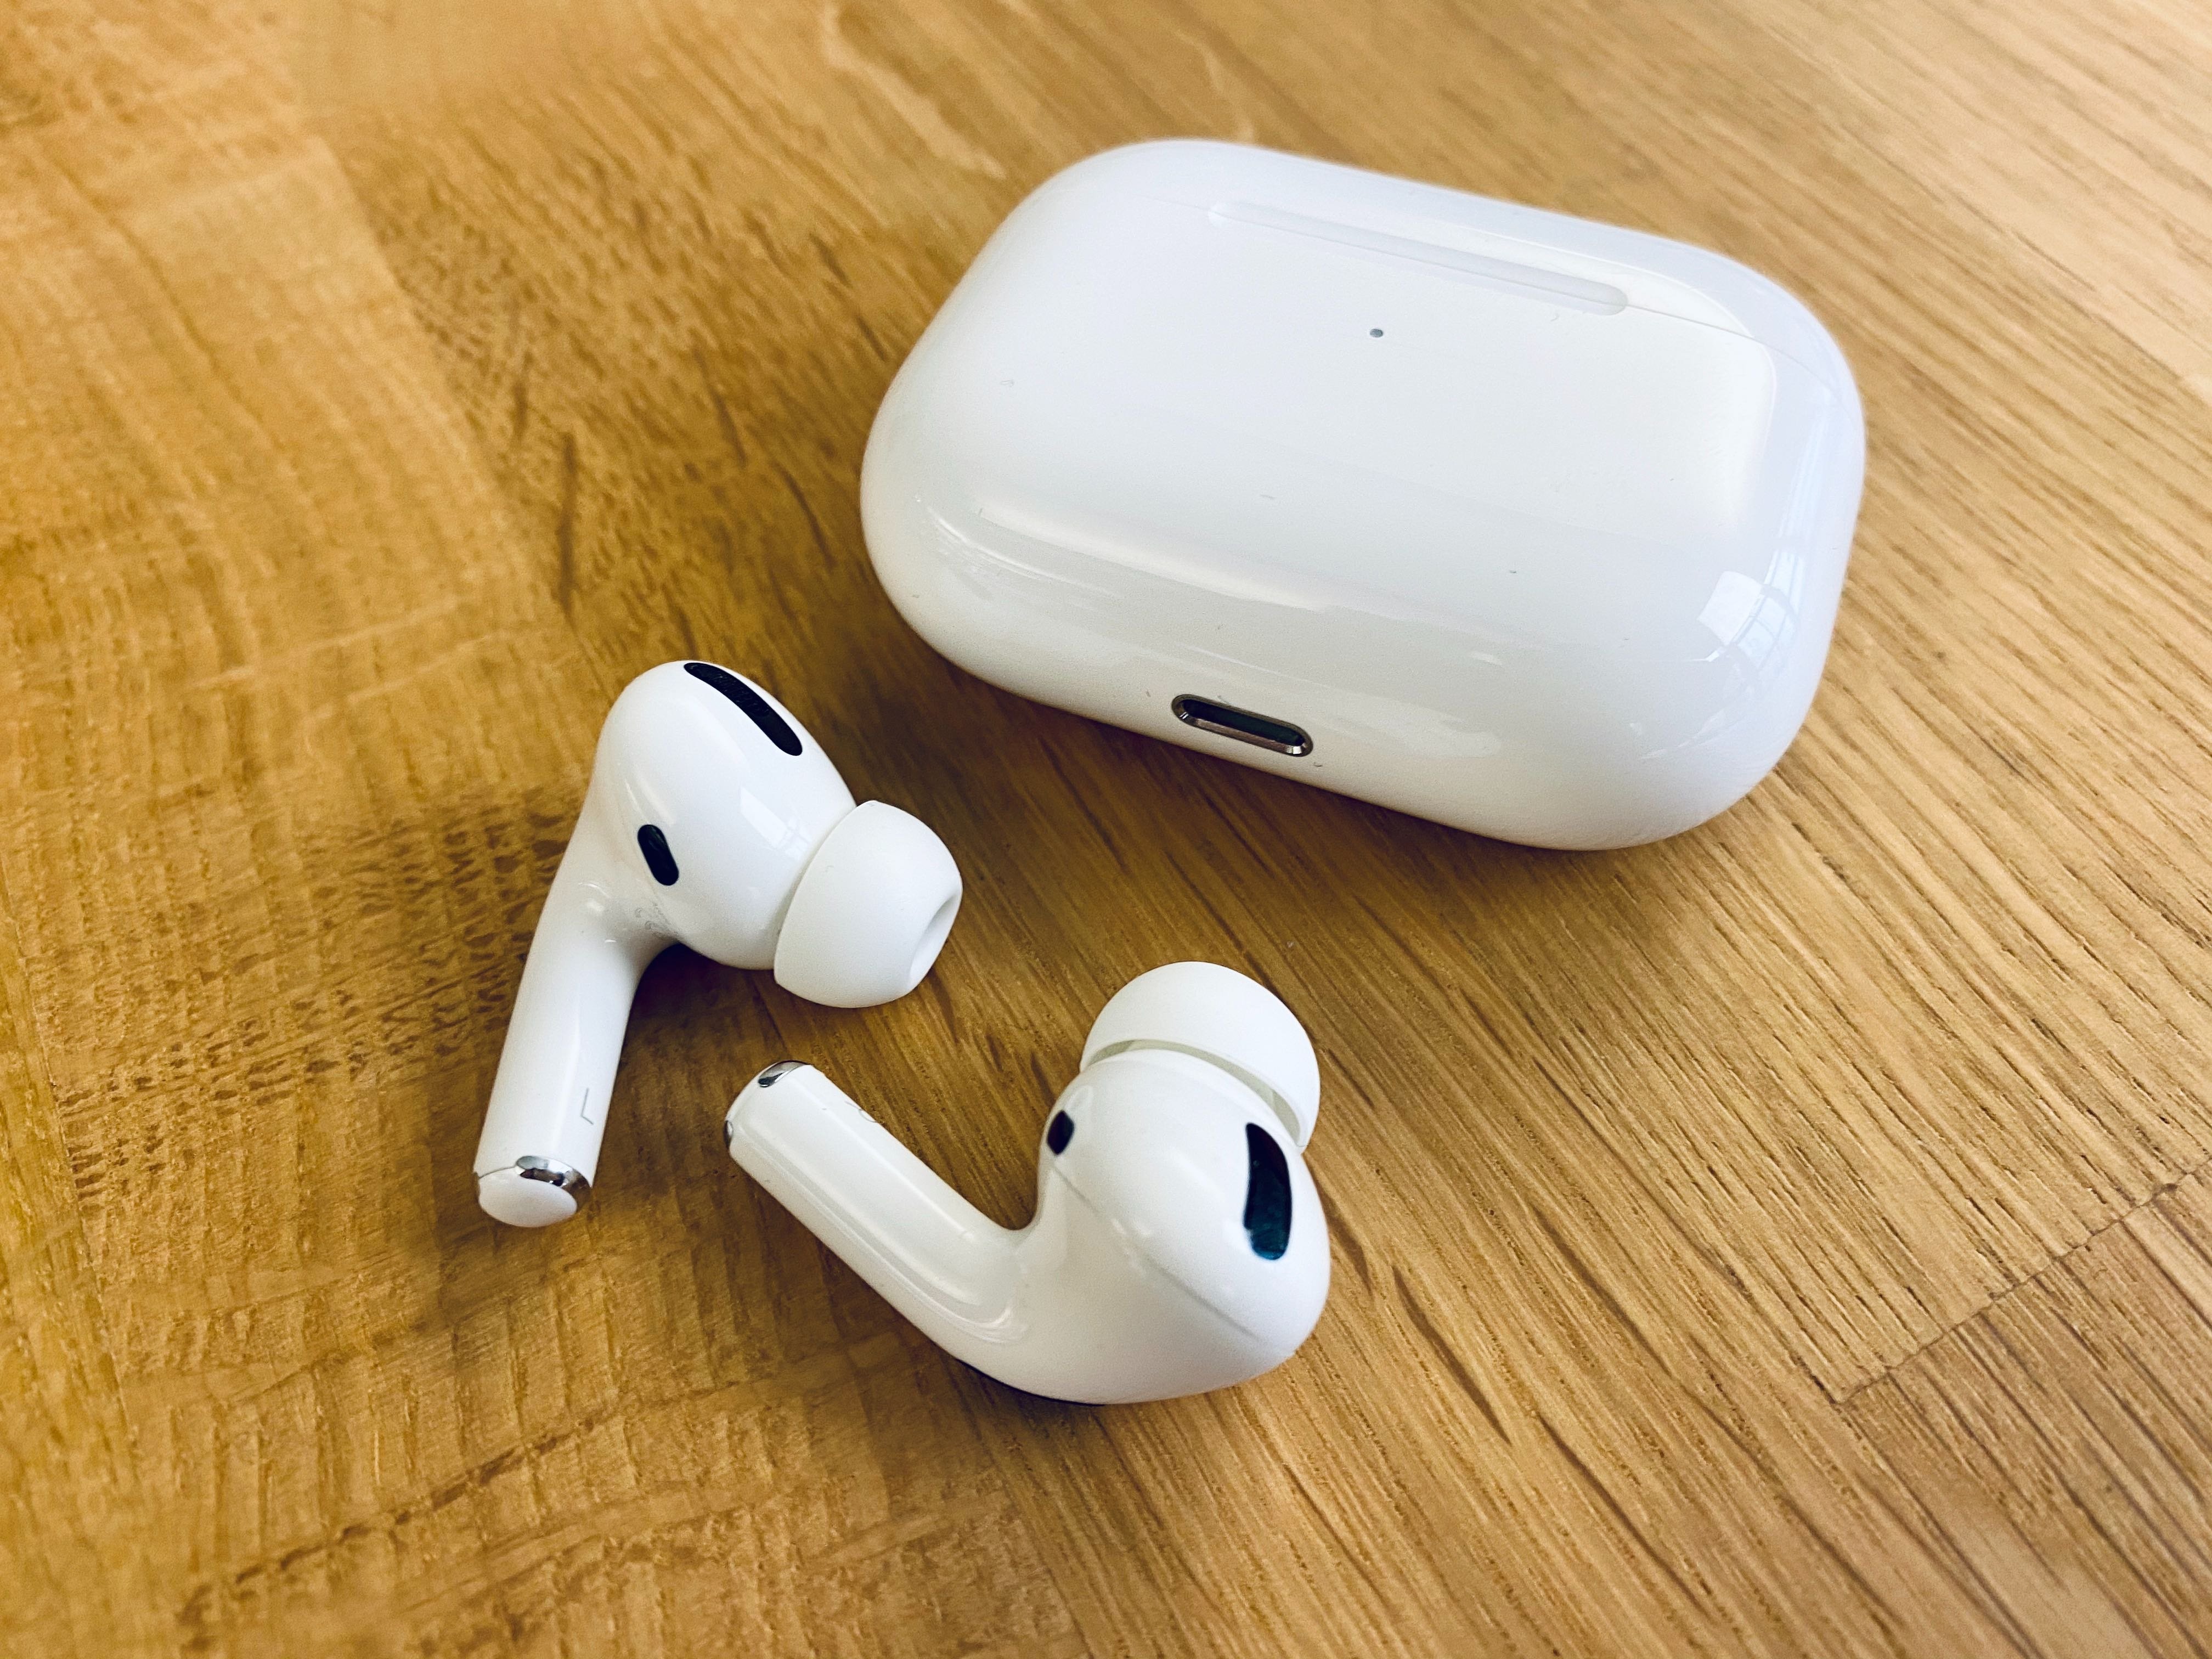 Airpods pro samsung. Apple AIRPODS 2. AIRPODS Samsung Galaxy. Apple AIRPODS Pro 2. AIRPODS Pro 2nd Generation.